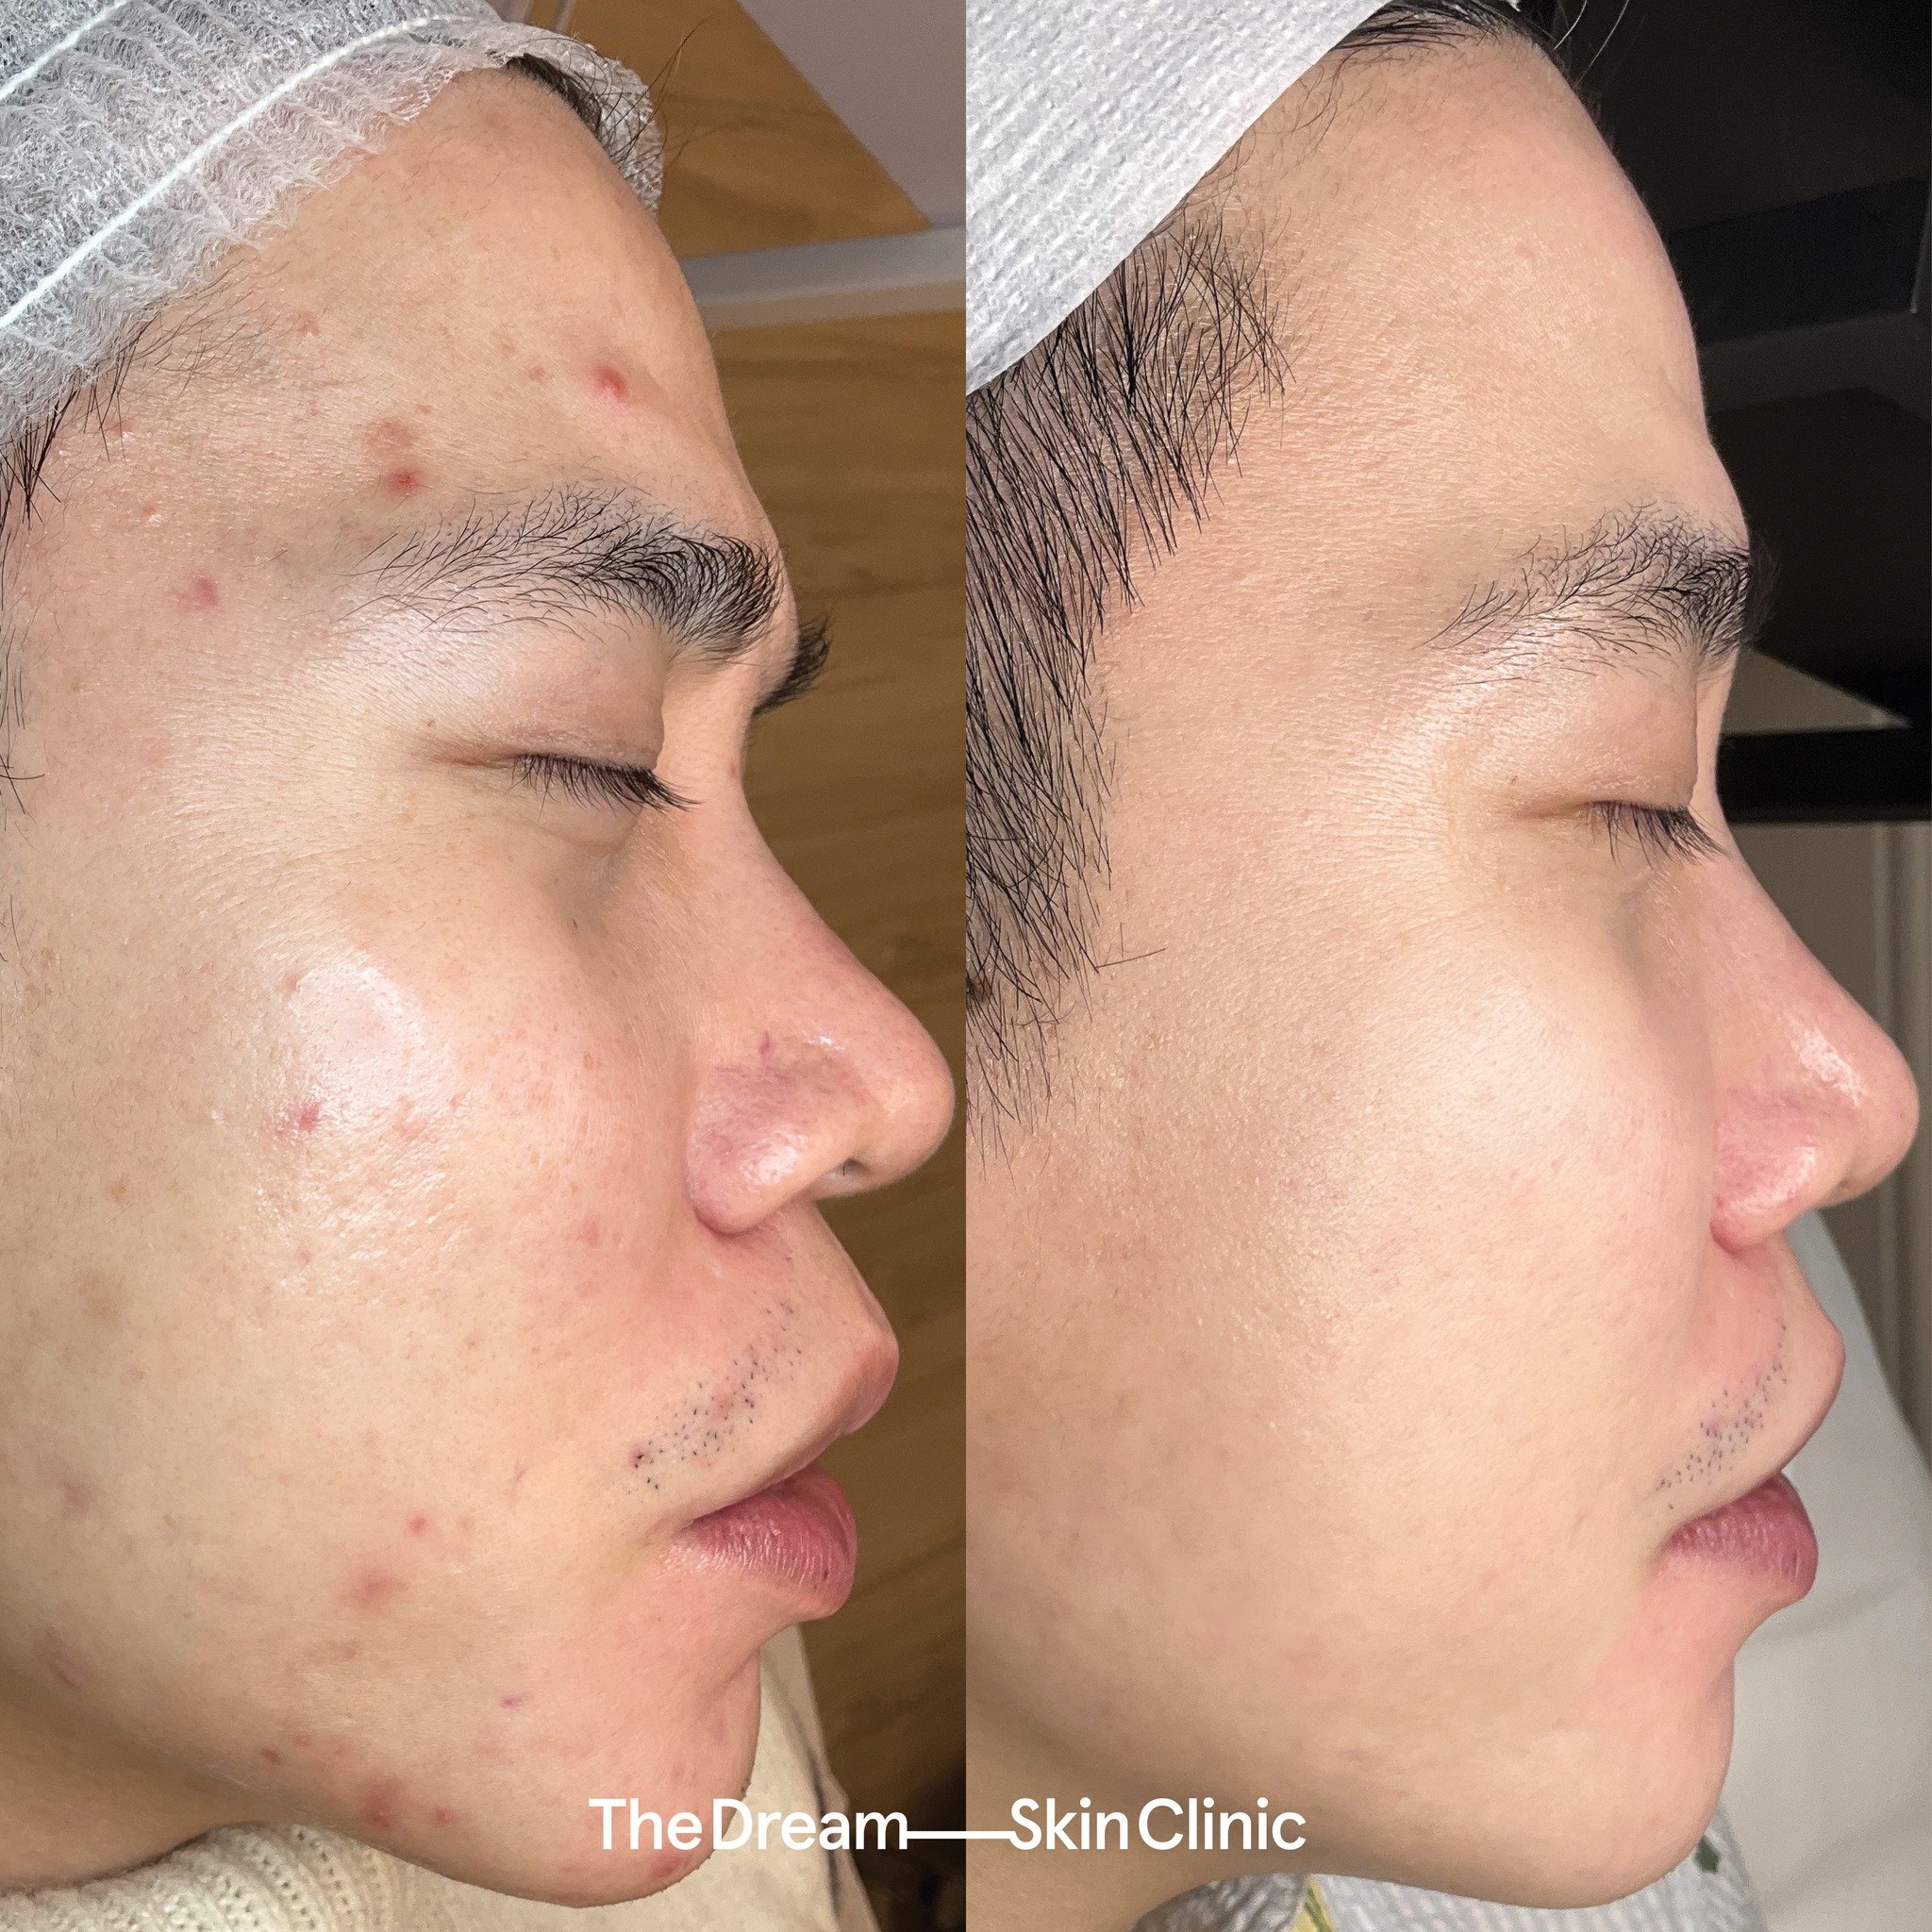 This client&rsquo;s concerns were:
∙ Pigmentation 
∙ Congestion 
∙ Scarring

Elevate your skin. Book a consultation using the link in our bio and get started on your skin journey with The Dream Skin Clinic!

*These photographs were captured and share